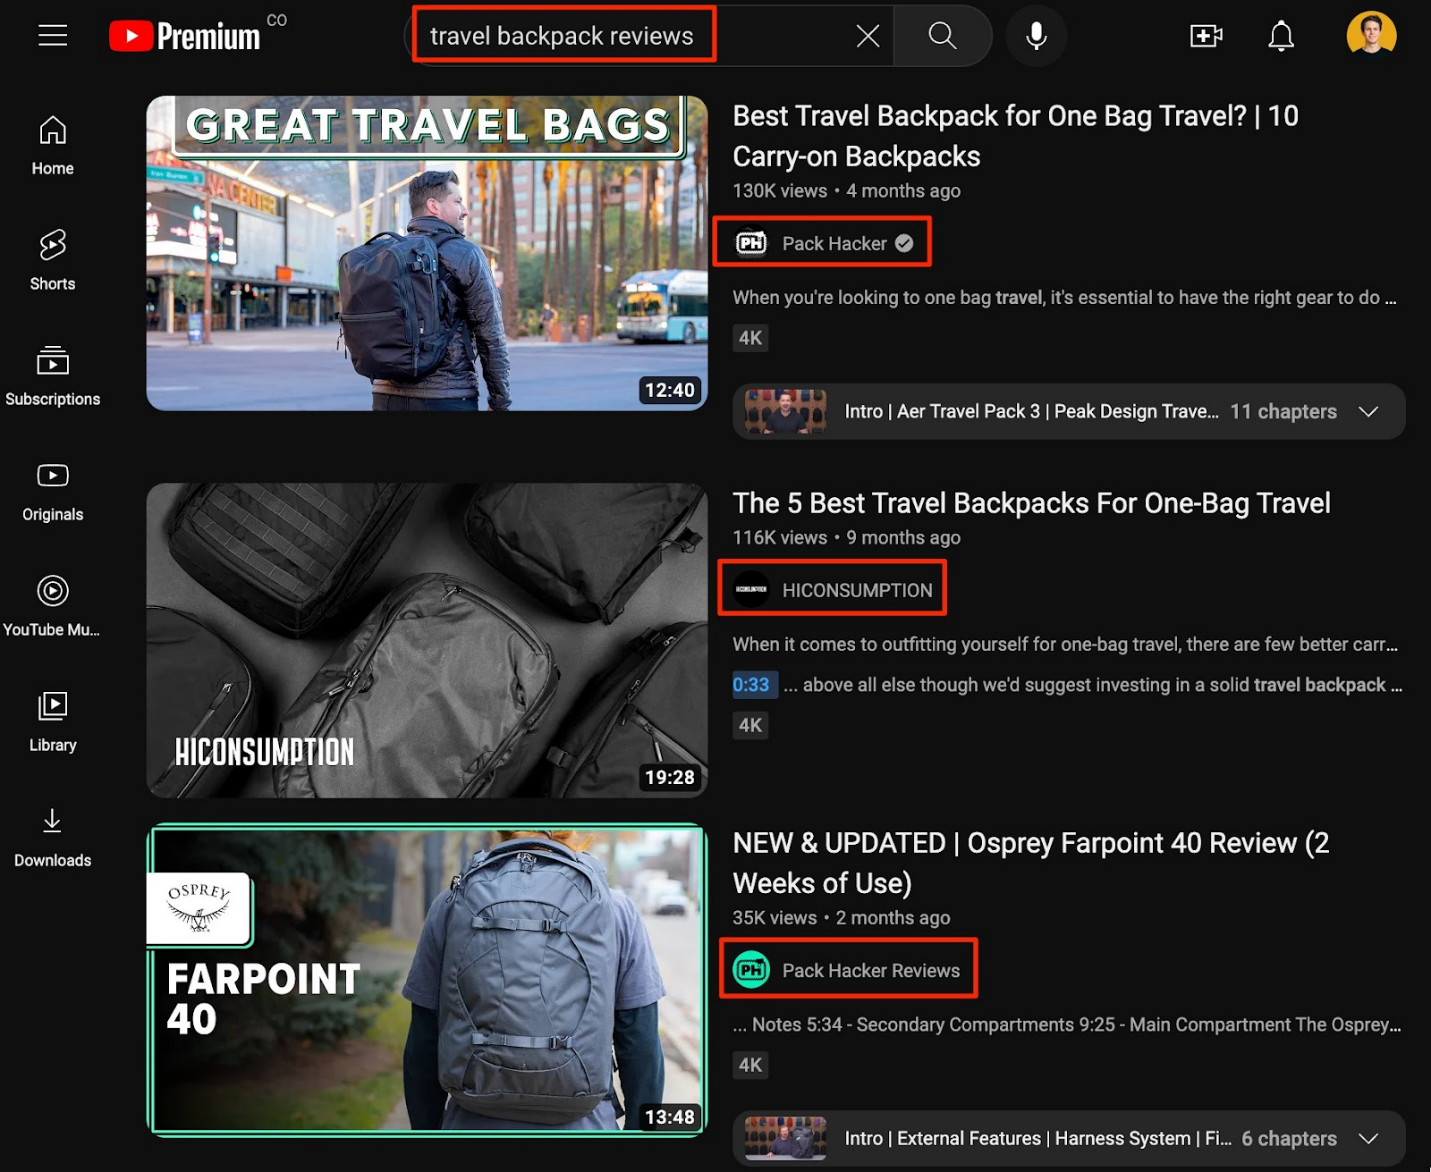 A YouTube search results page with the prompt "Travel Backpack Reviews".